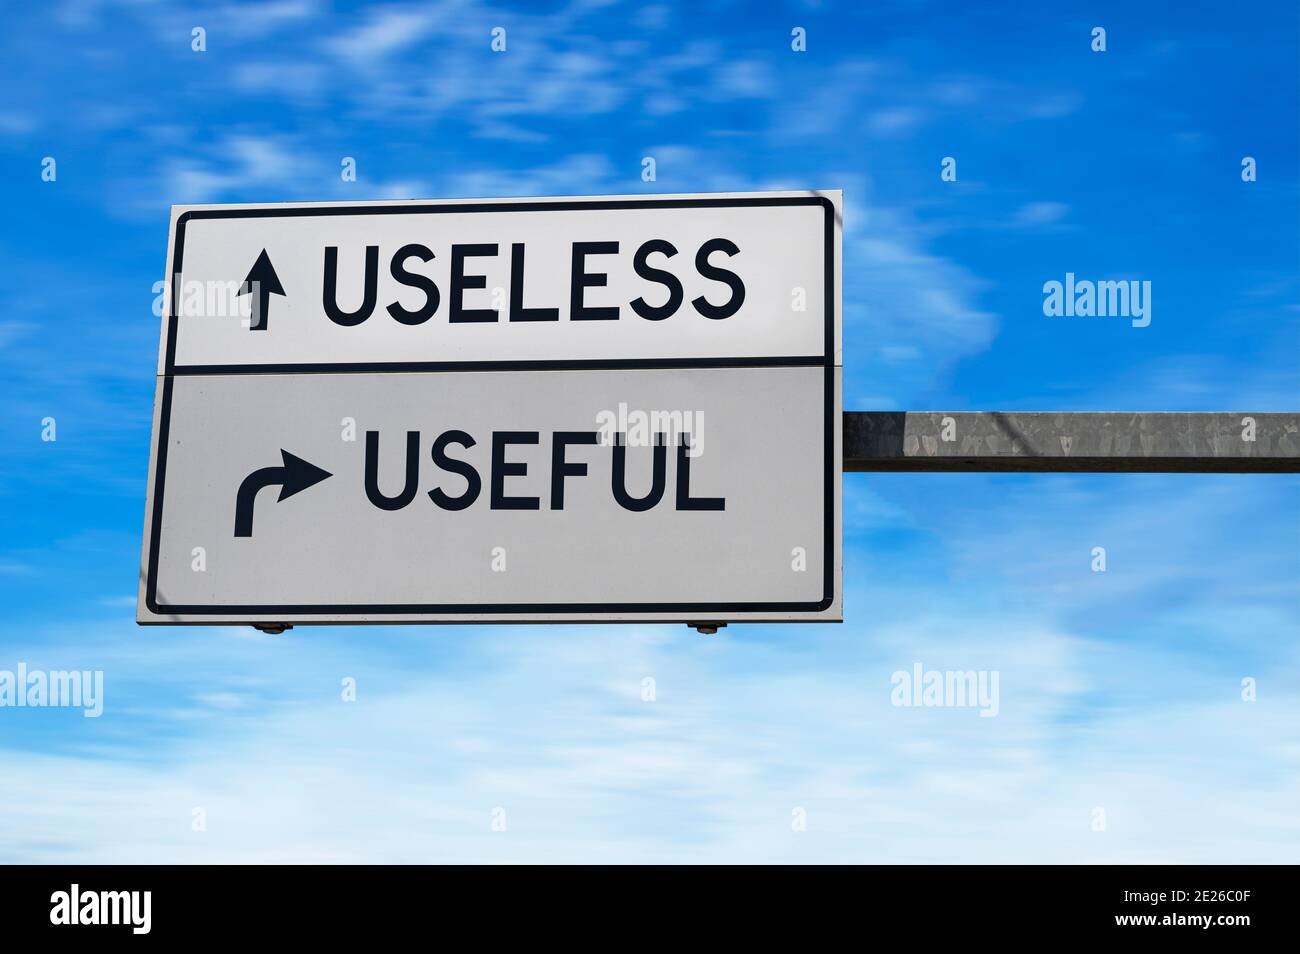 Road sign with words useless versus useful. White two street signs with arrow on metal pole on blue sky background. Stock Photo